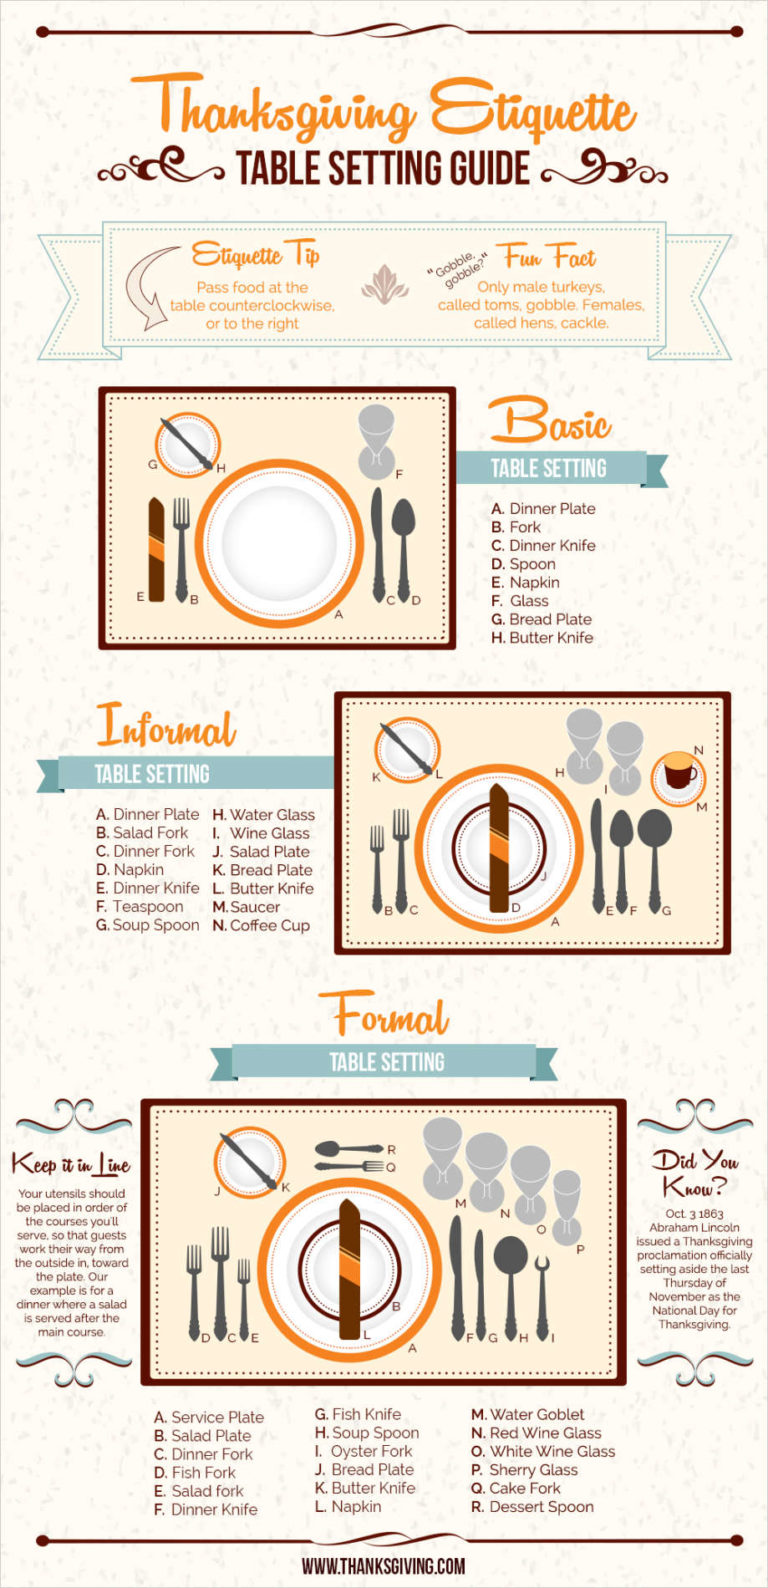 How to set a Thanksgiving table infographic